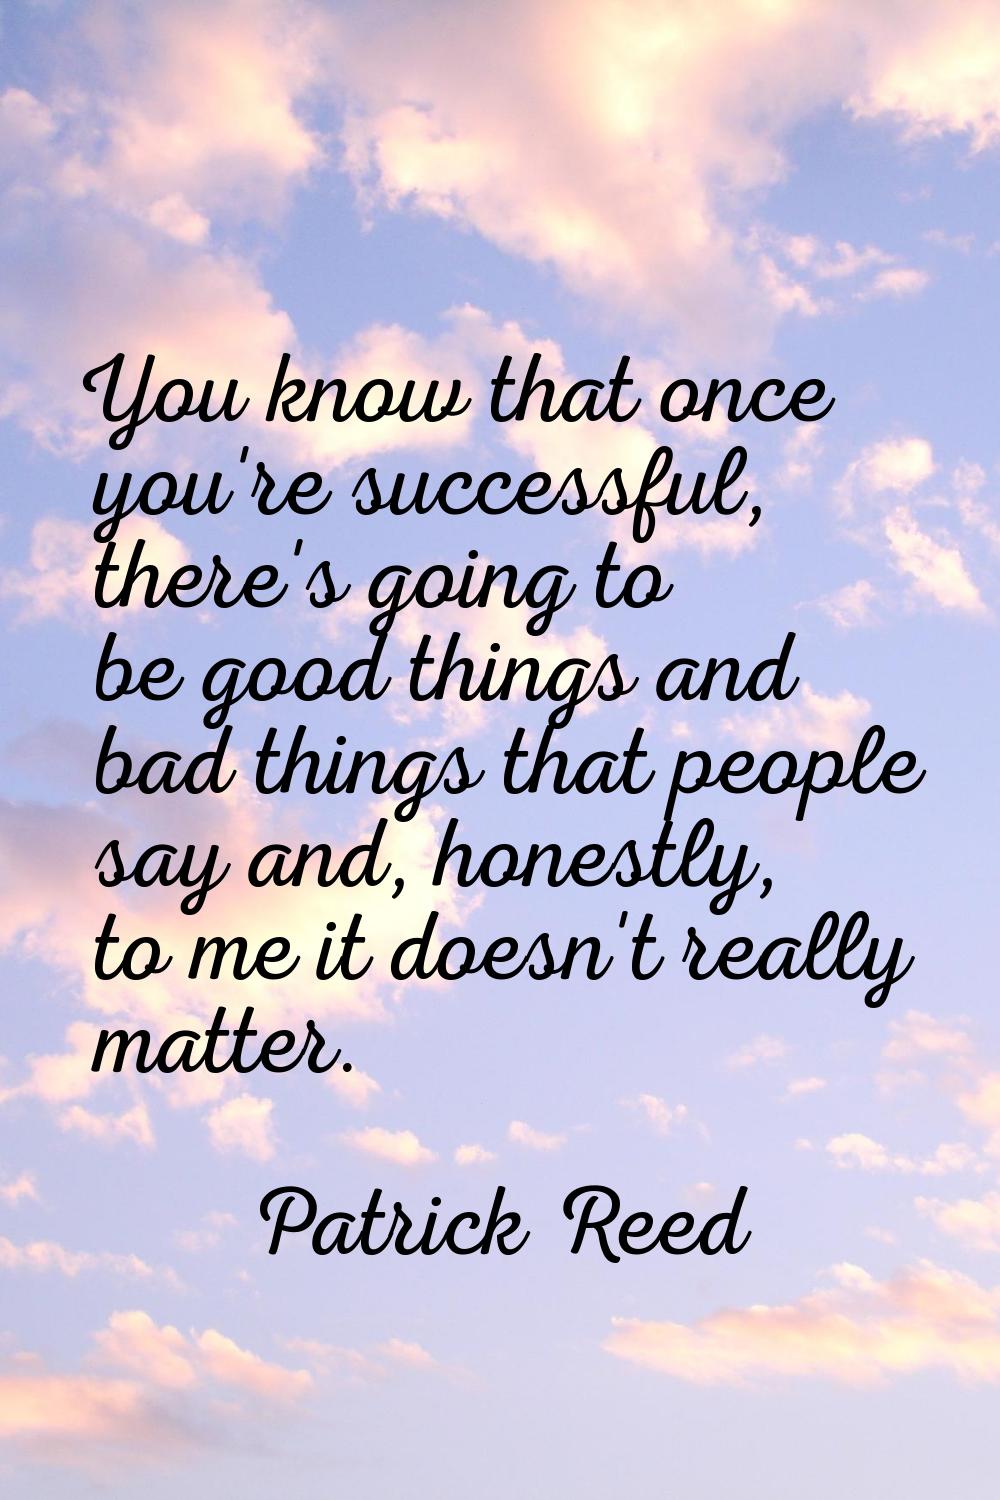 You know that once you're successful, there's going to be good things and bad things that people sa